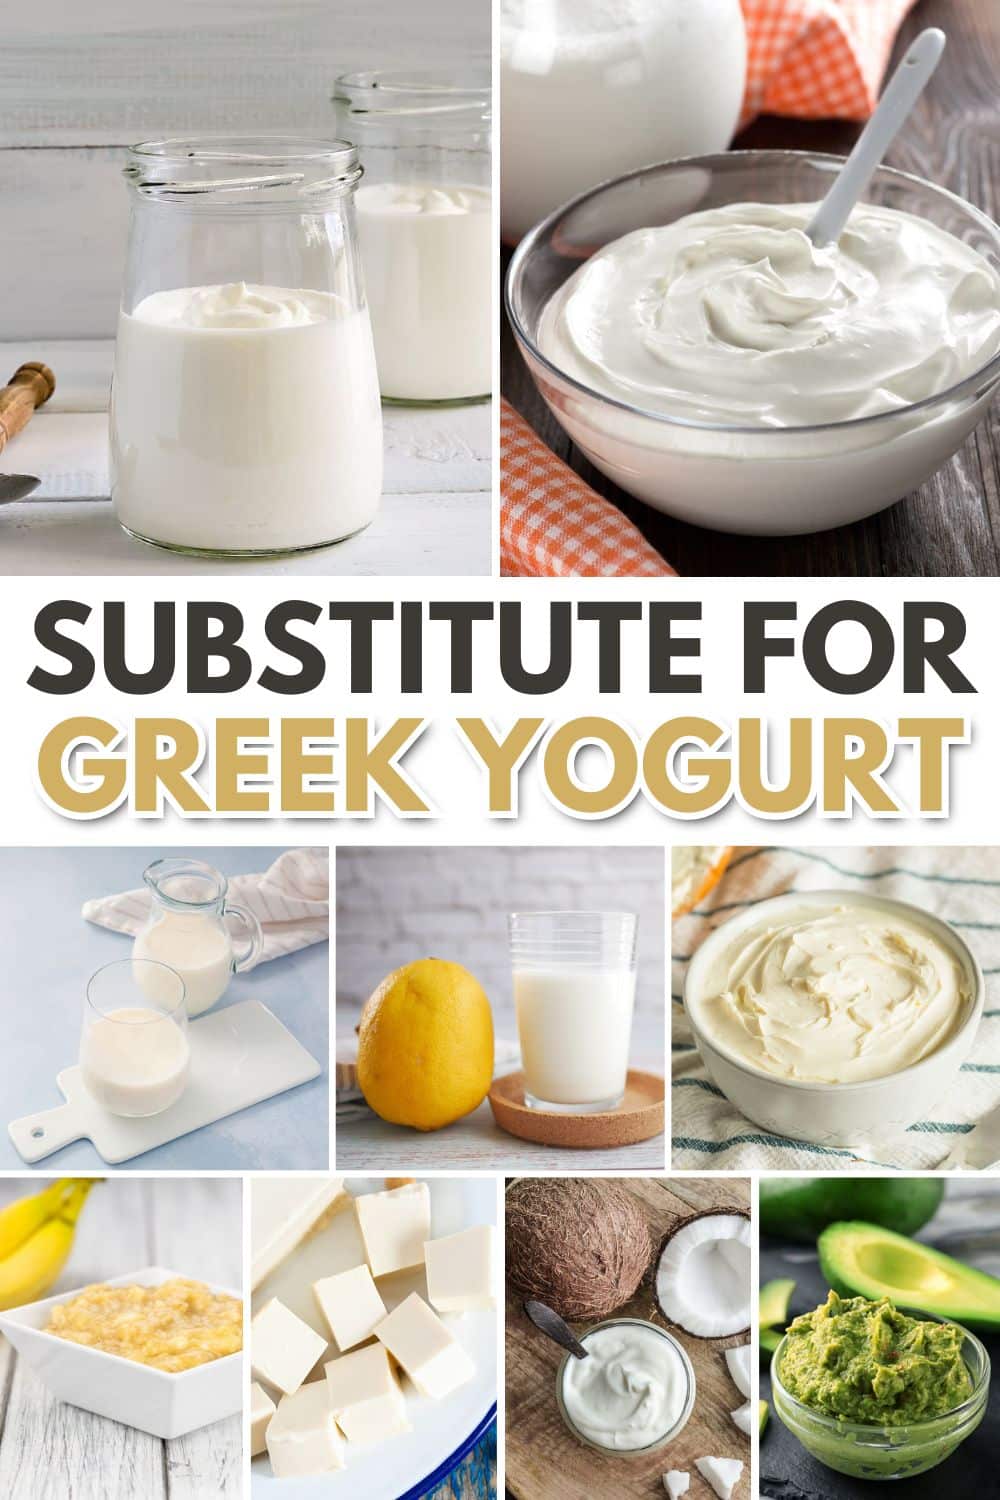 A collage of images showcasing Greek yogurt substitutes.